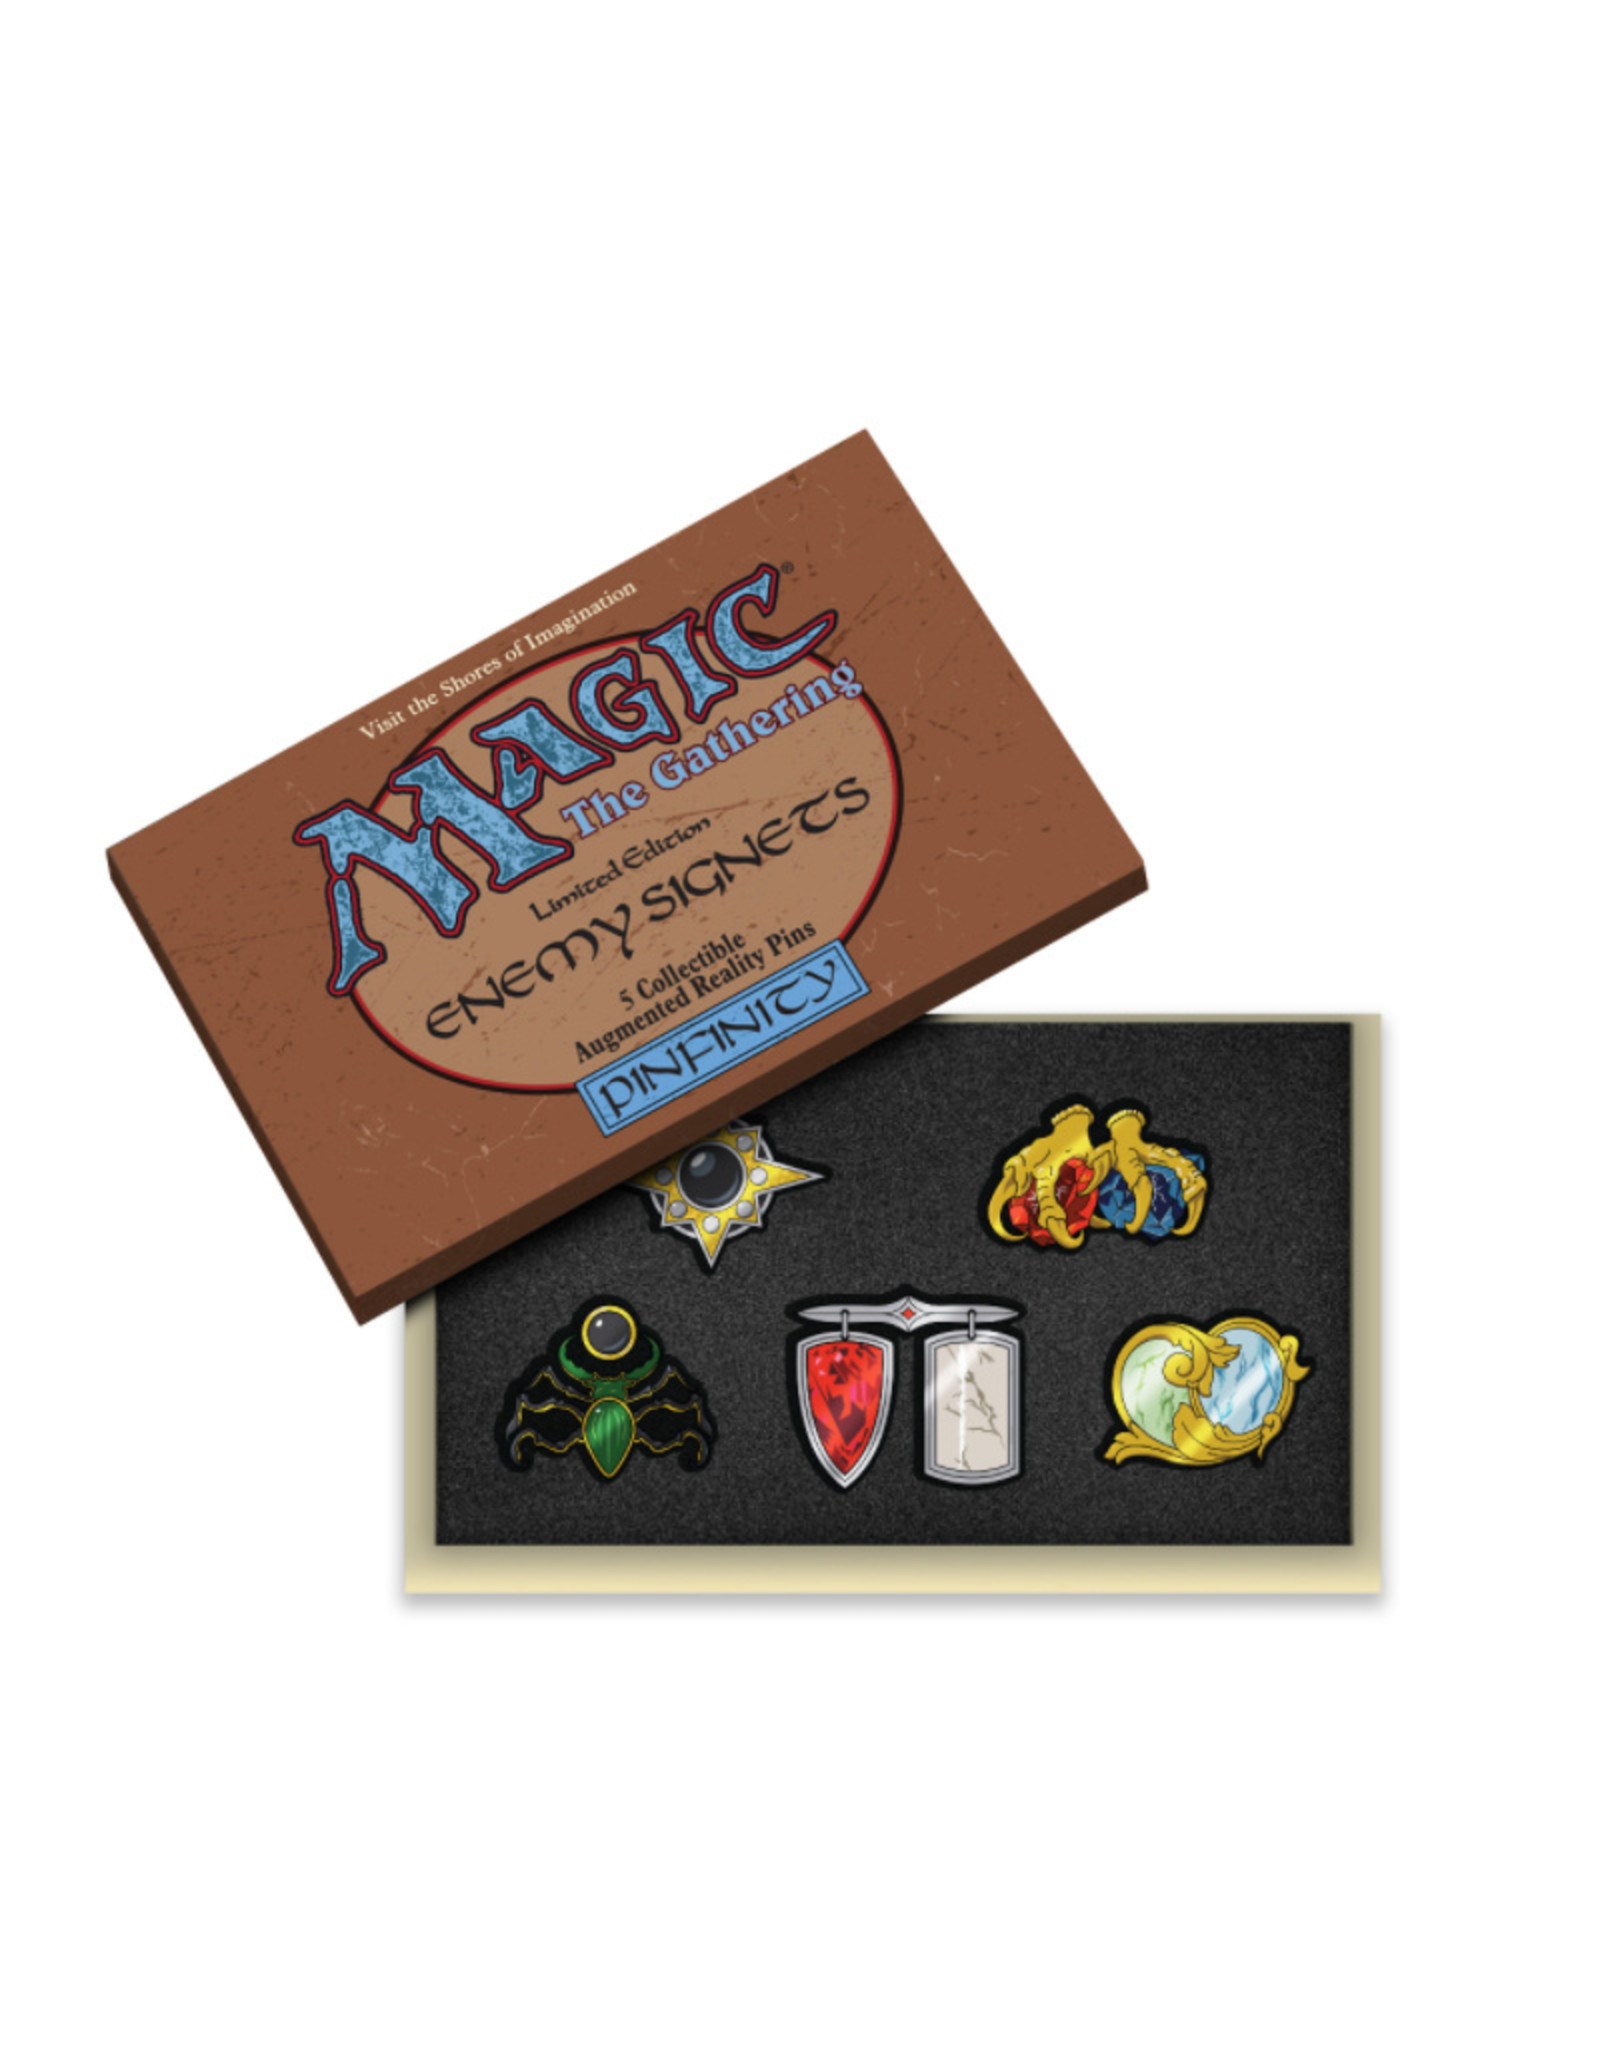 Pinfinity Magic the Gathering AR Pin Previews Exclusive Master Pack Set